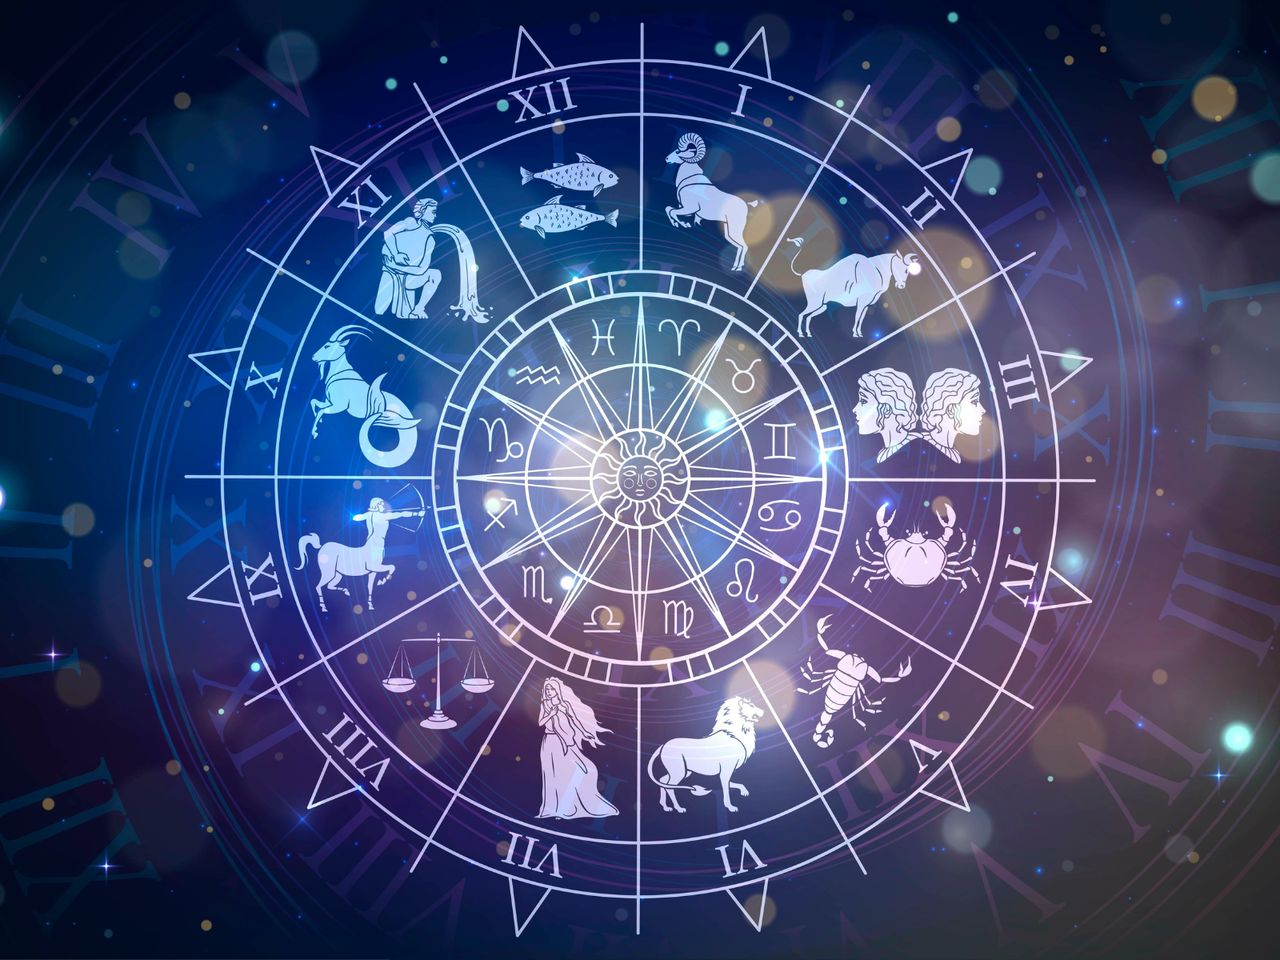 Some zodiac signs are fake.